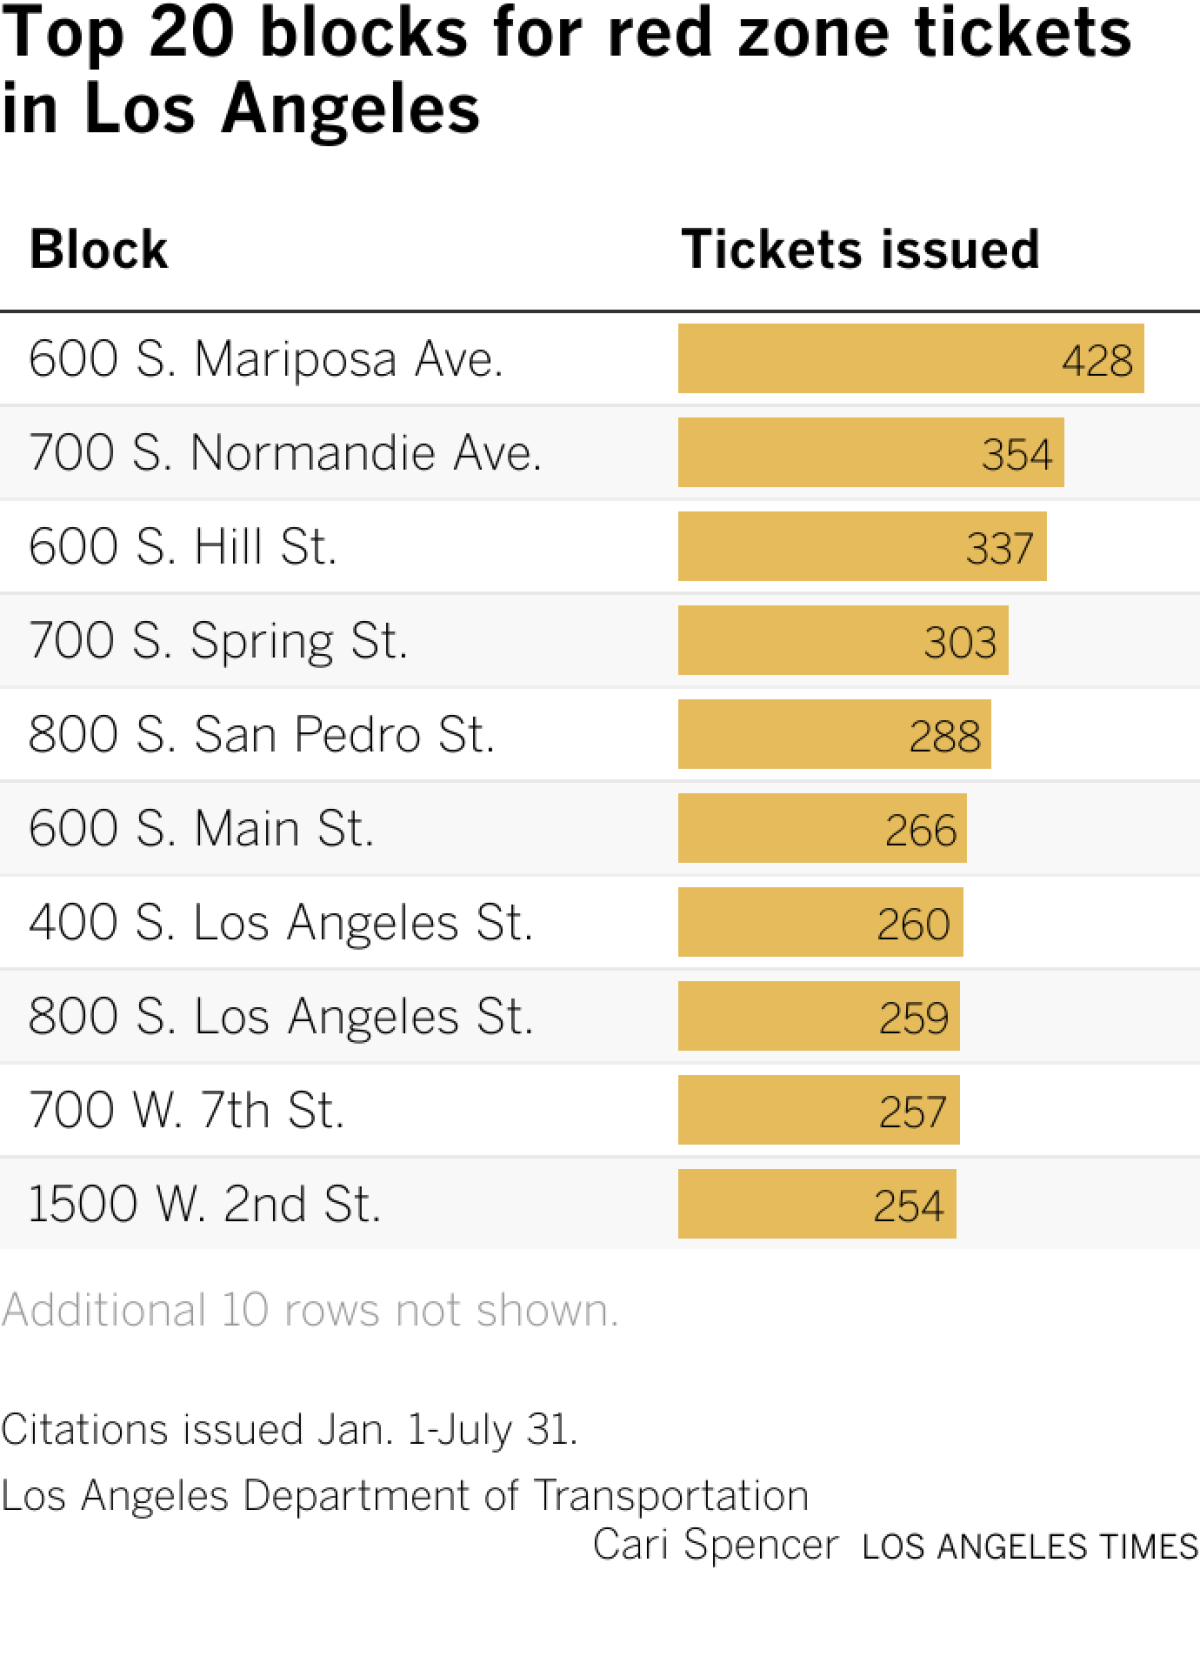 Table lists the top 20 blocks where people get tickets for parking in a red zone
600 MARIPOSA AV S. ., Los Angeles, CA	428
700 NORMANDIE AV S., Los Angeles, CA	354
600 HILL ST S., Los Angeles, CA	337
700 SPRING ST S., Los Angeles, CA	303
800 SAN PEDRO ST S., Los Angeles, CA	288
600 MAIN ST S., Los Angeles, CA	266
400 LOS ANGELES ST S., Los Angeles, CA	260
800 LOS ANGELES ST S., Los Angeles, CA	259
700 7TH ST W., Los Angeles, CA	257
1500 2ND ST W., Los Angeles, CA	254
800 7TH ST W., Los Angeles, CA	249
500 MAIN ST S., Los Angeles, CA	235
700 MAGNOLIA AV., Los Angeles, CA	214
700 GRAND AV S., Los Angeles, CA	214
2700 SAN MARINO ST., Los Angeles, CA	213
400 BURLINGTON AV S., Los Angeles, CA	213
200 LA FAYETTE PARK PL S., Los Angeles, CA	212
200 WITMER ST., Los Angeles, CA	210
300 2ND ST E., Los Angeles, CA	209
700 BROADWAY S., Los Angeles, CA	205